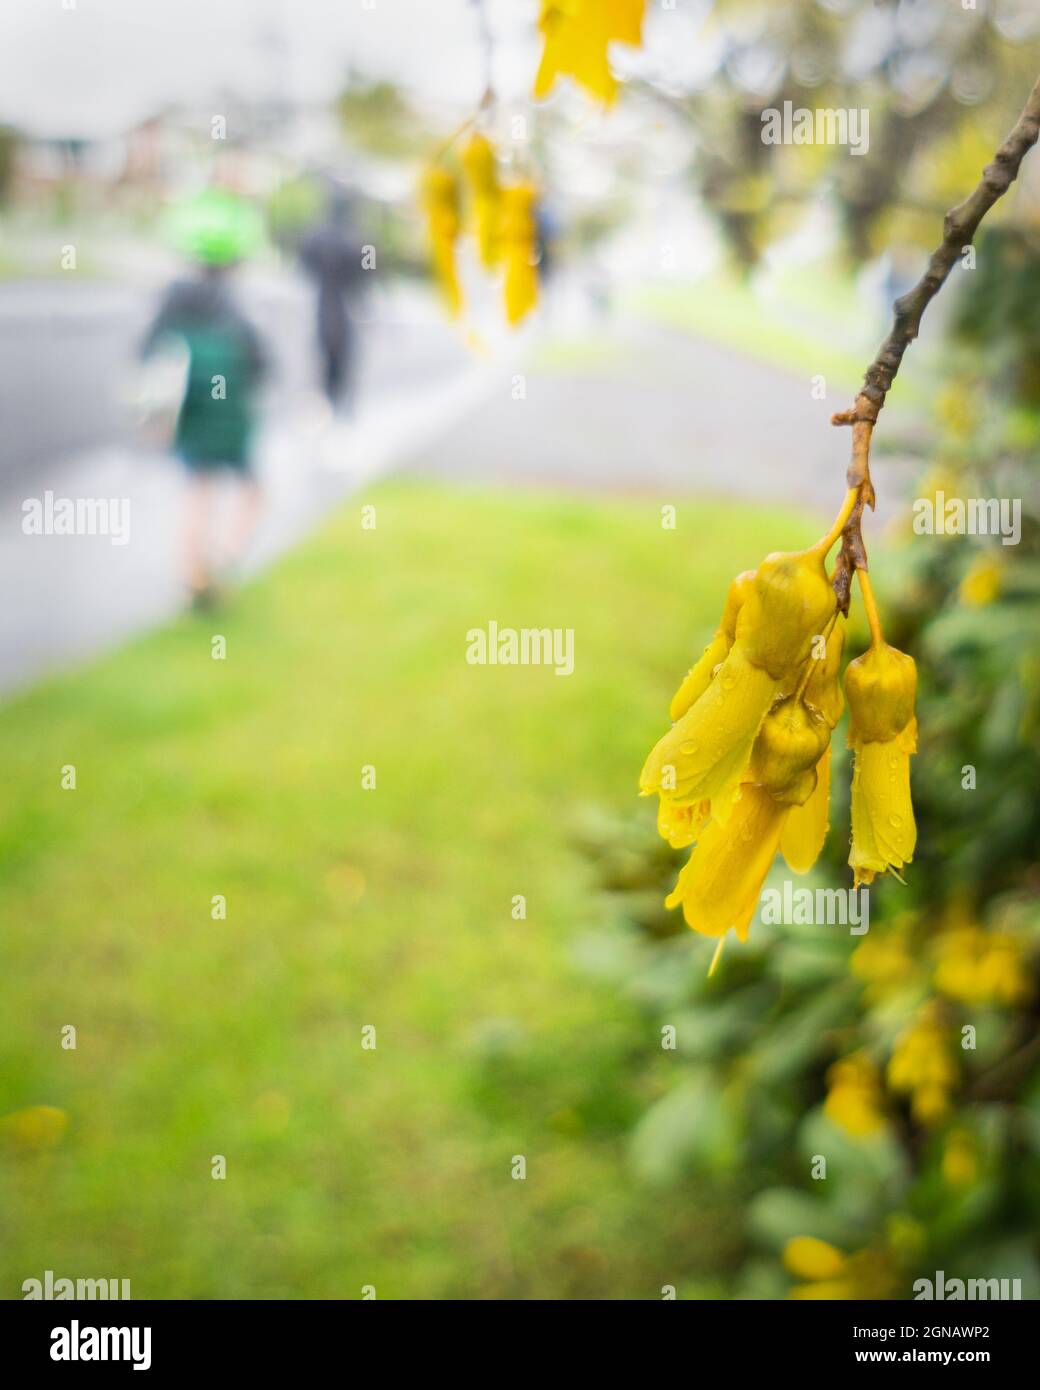 Yellow flowers of the native Kowhai tree along the suburban street in Auckland, out of focus people walking. Vertical format. Stock Photo